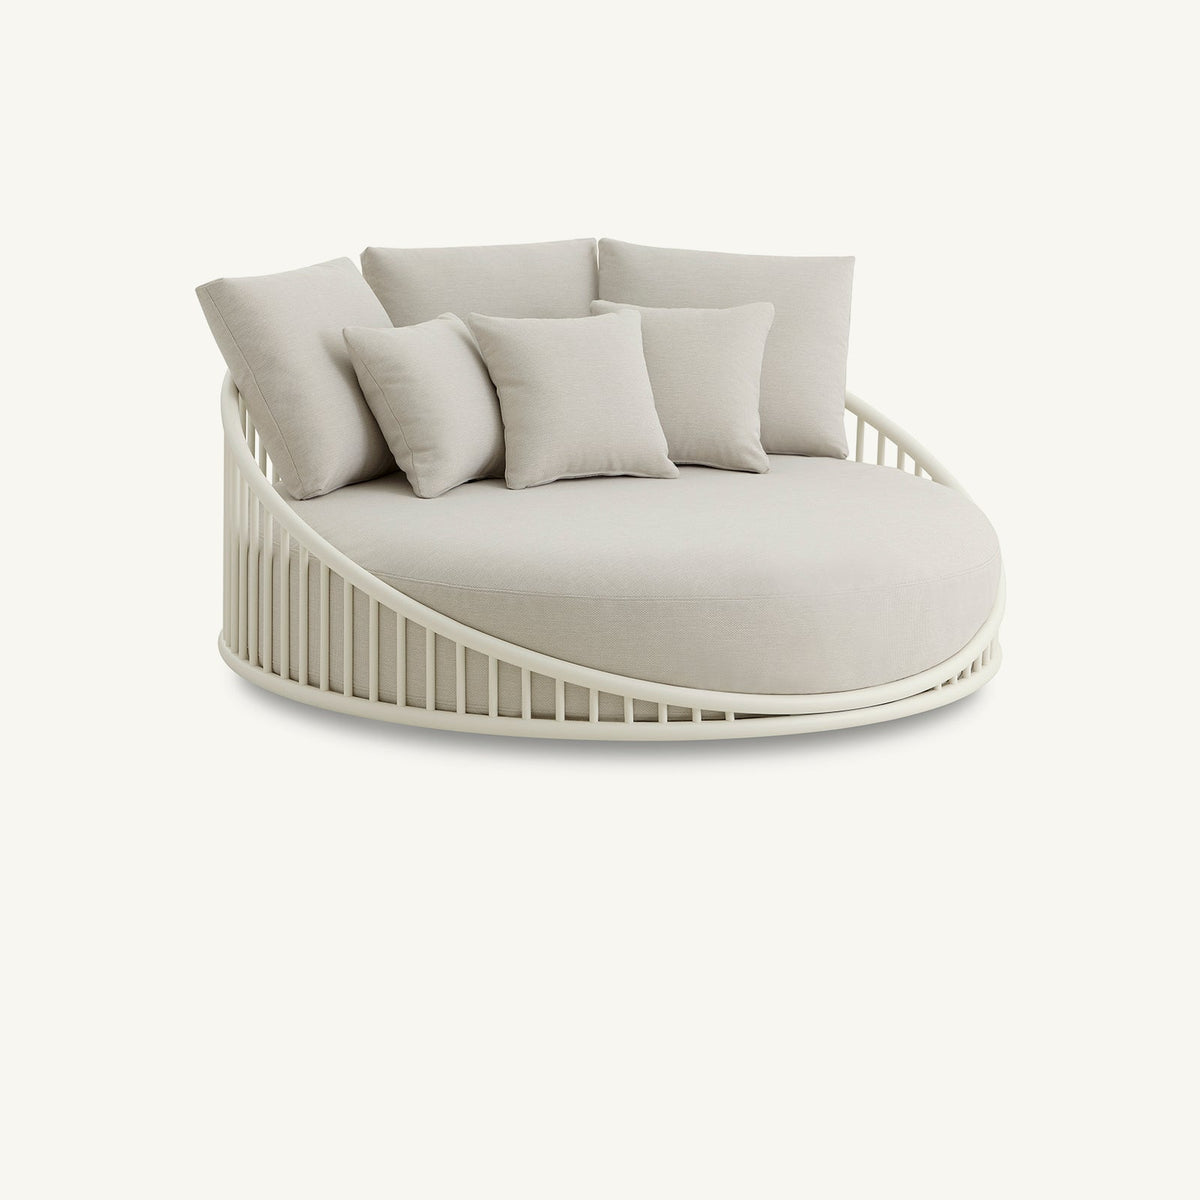 Cask Outdoor Daybed-Expormim-Contract Furniture Store